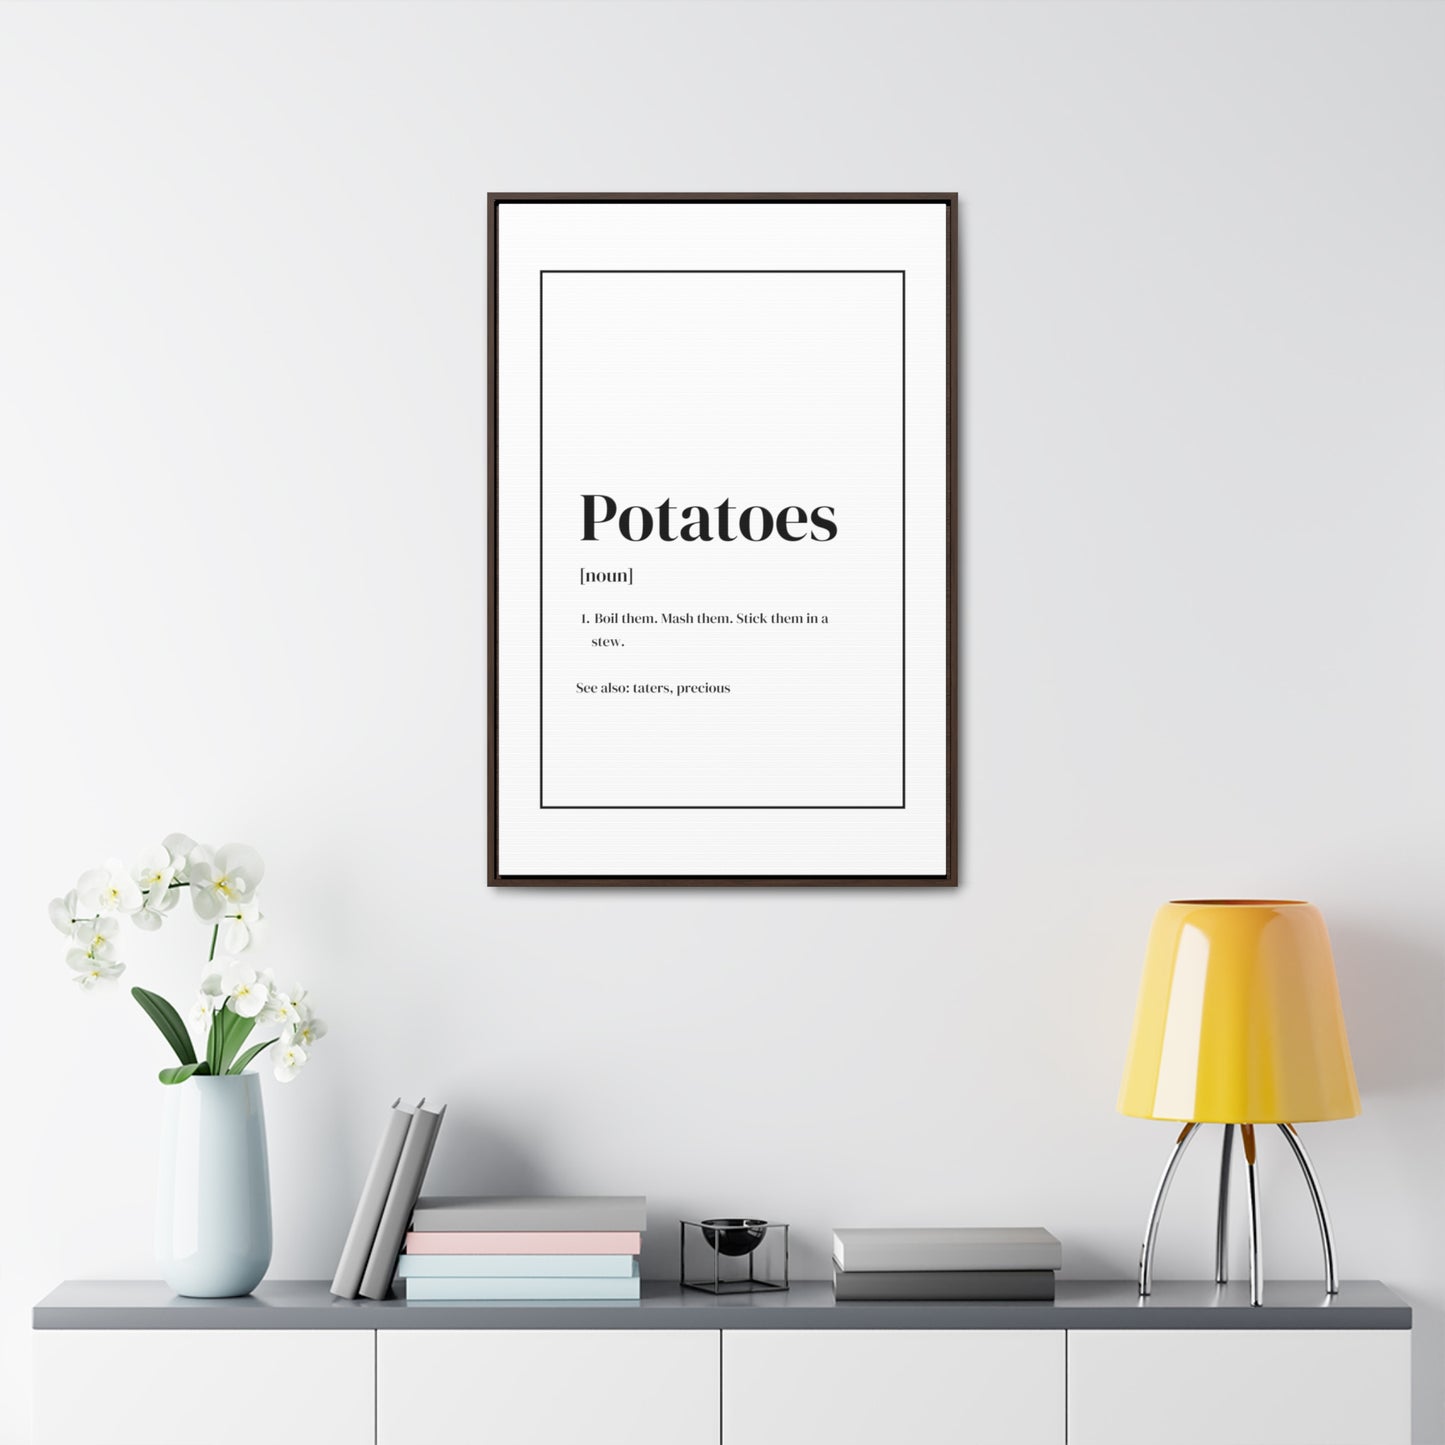 Potatoes Definition Gallery Framed Canvas - Lord of the Rings